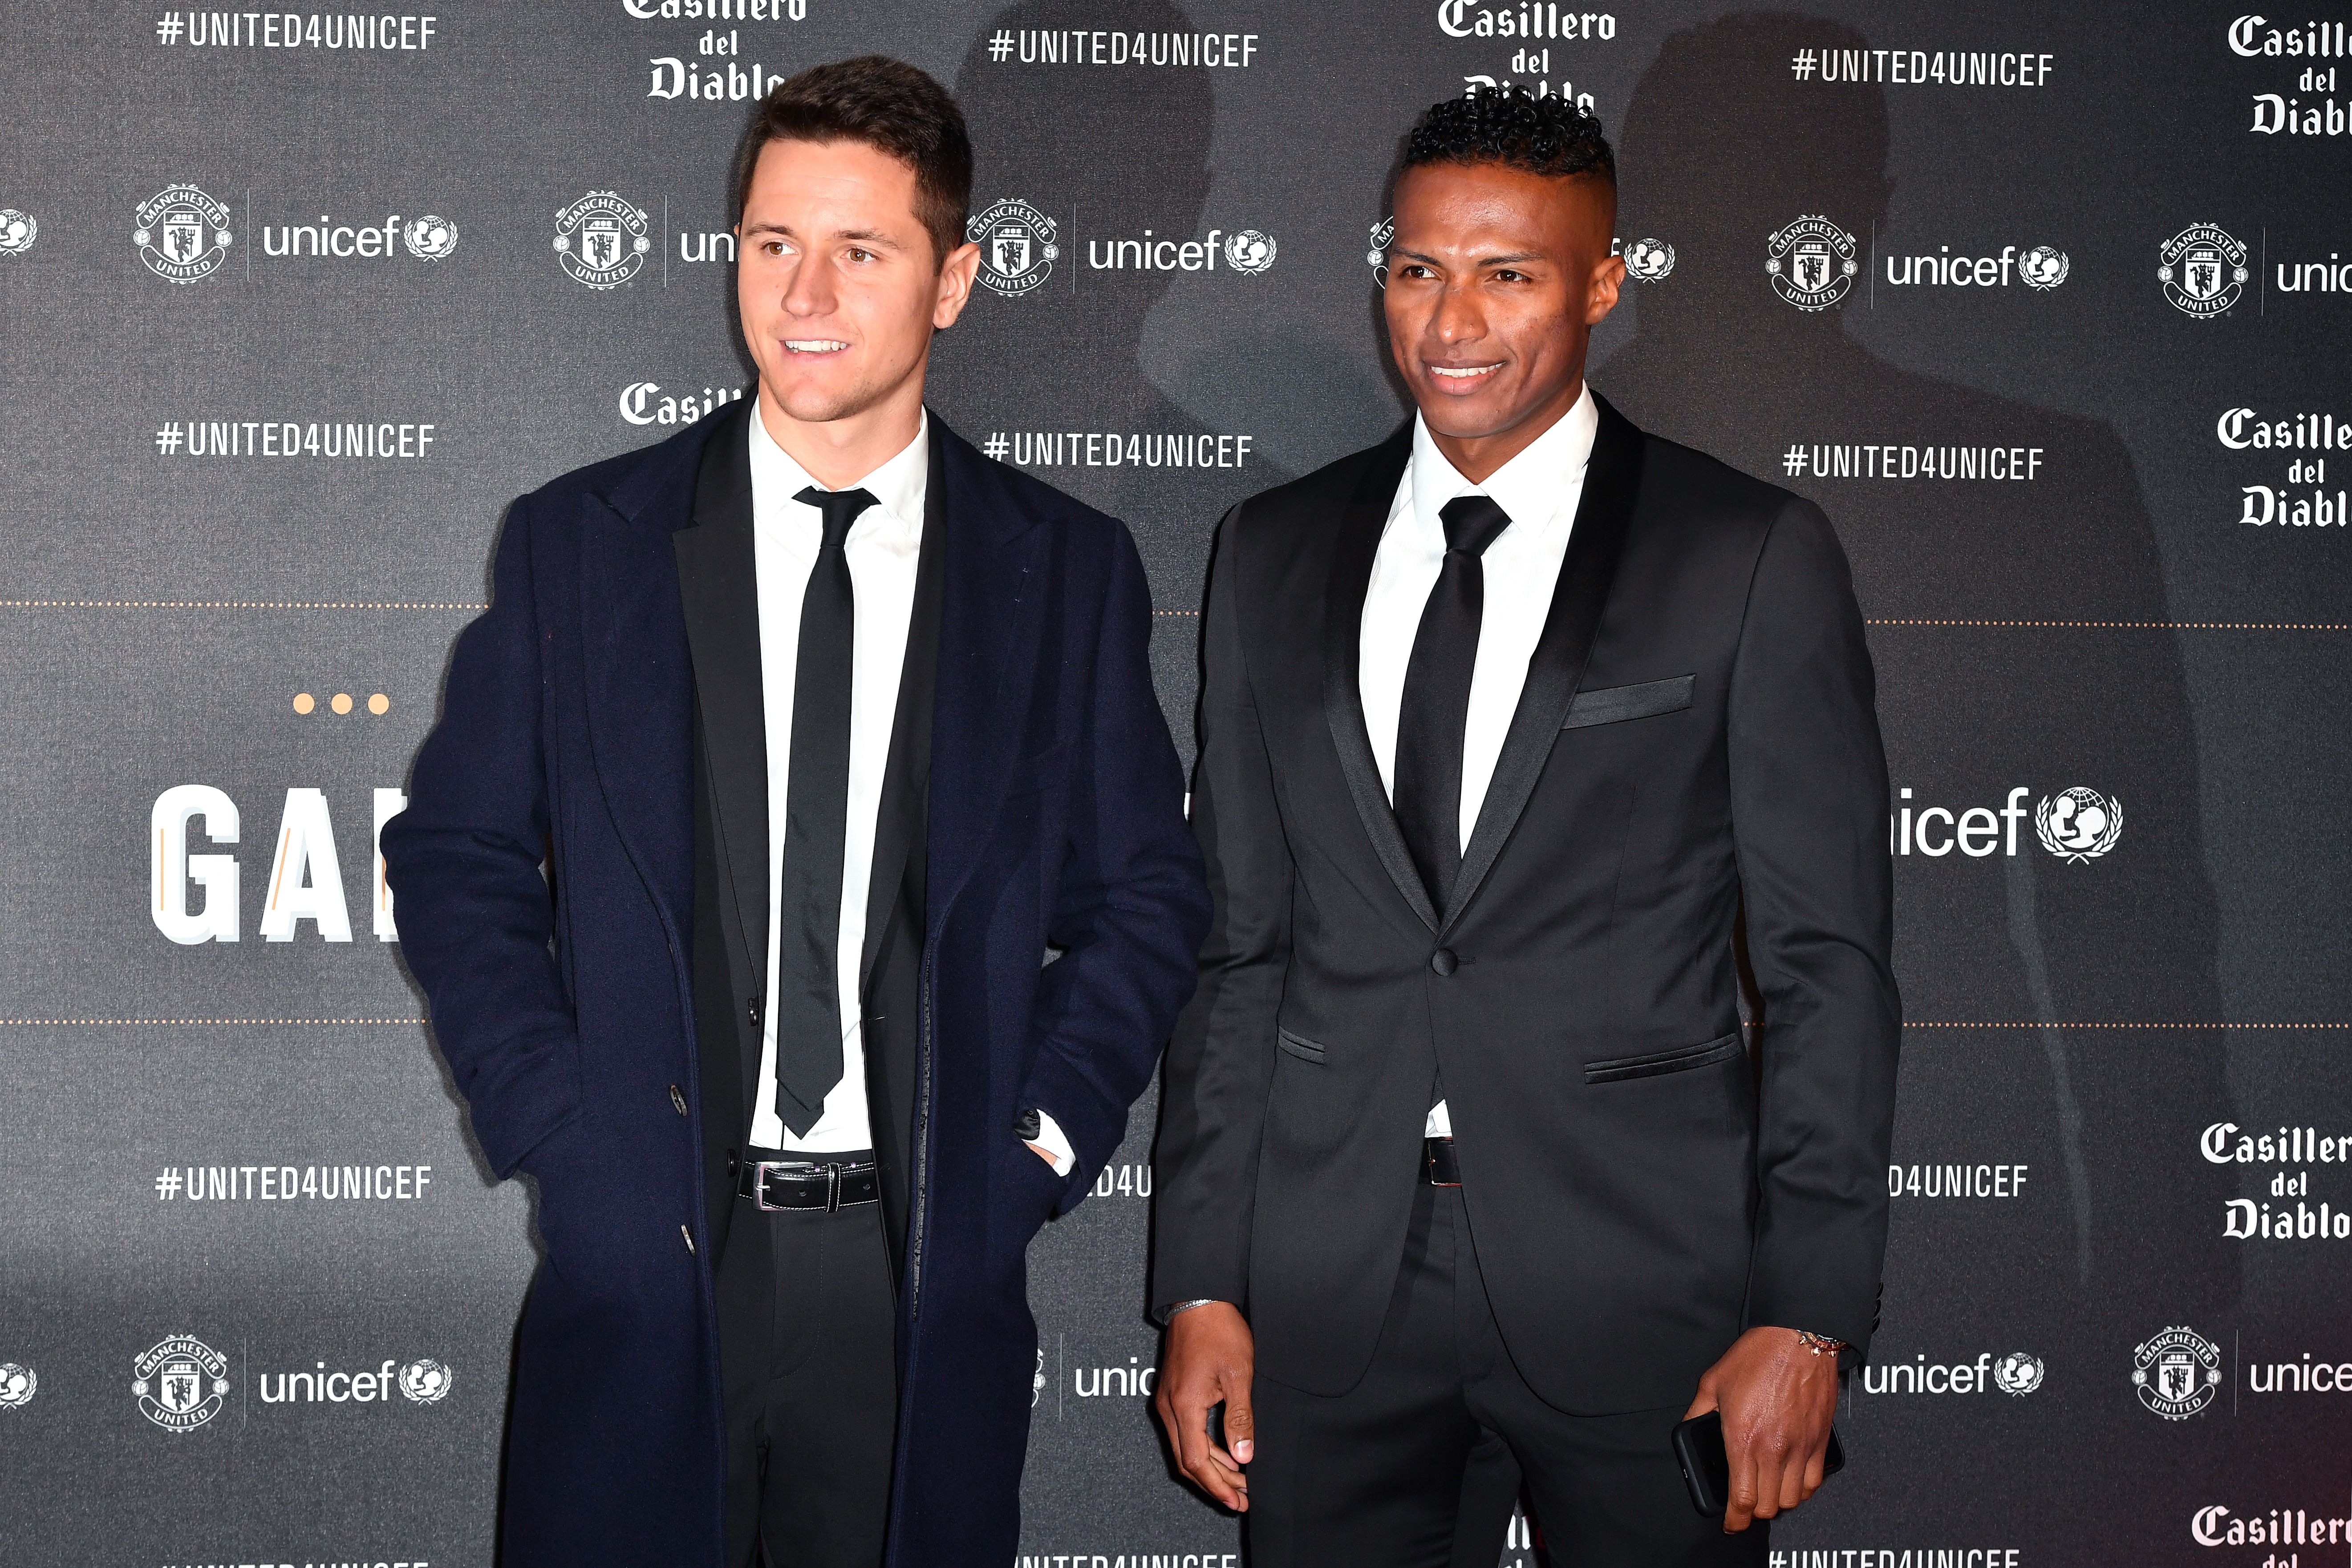 MANCHESTER, ENGLAND - NOVEMBER 15:  Ander Herrera (left) and Antonio Valencia attends the United for Unicef Gala Dinner at Old Trafford on November 15, 2017 in Manchester, England.  (Photo by Anthony Devlin/Getty Images)